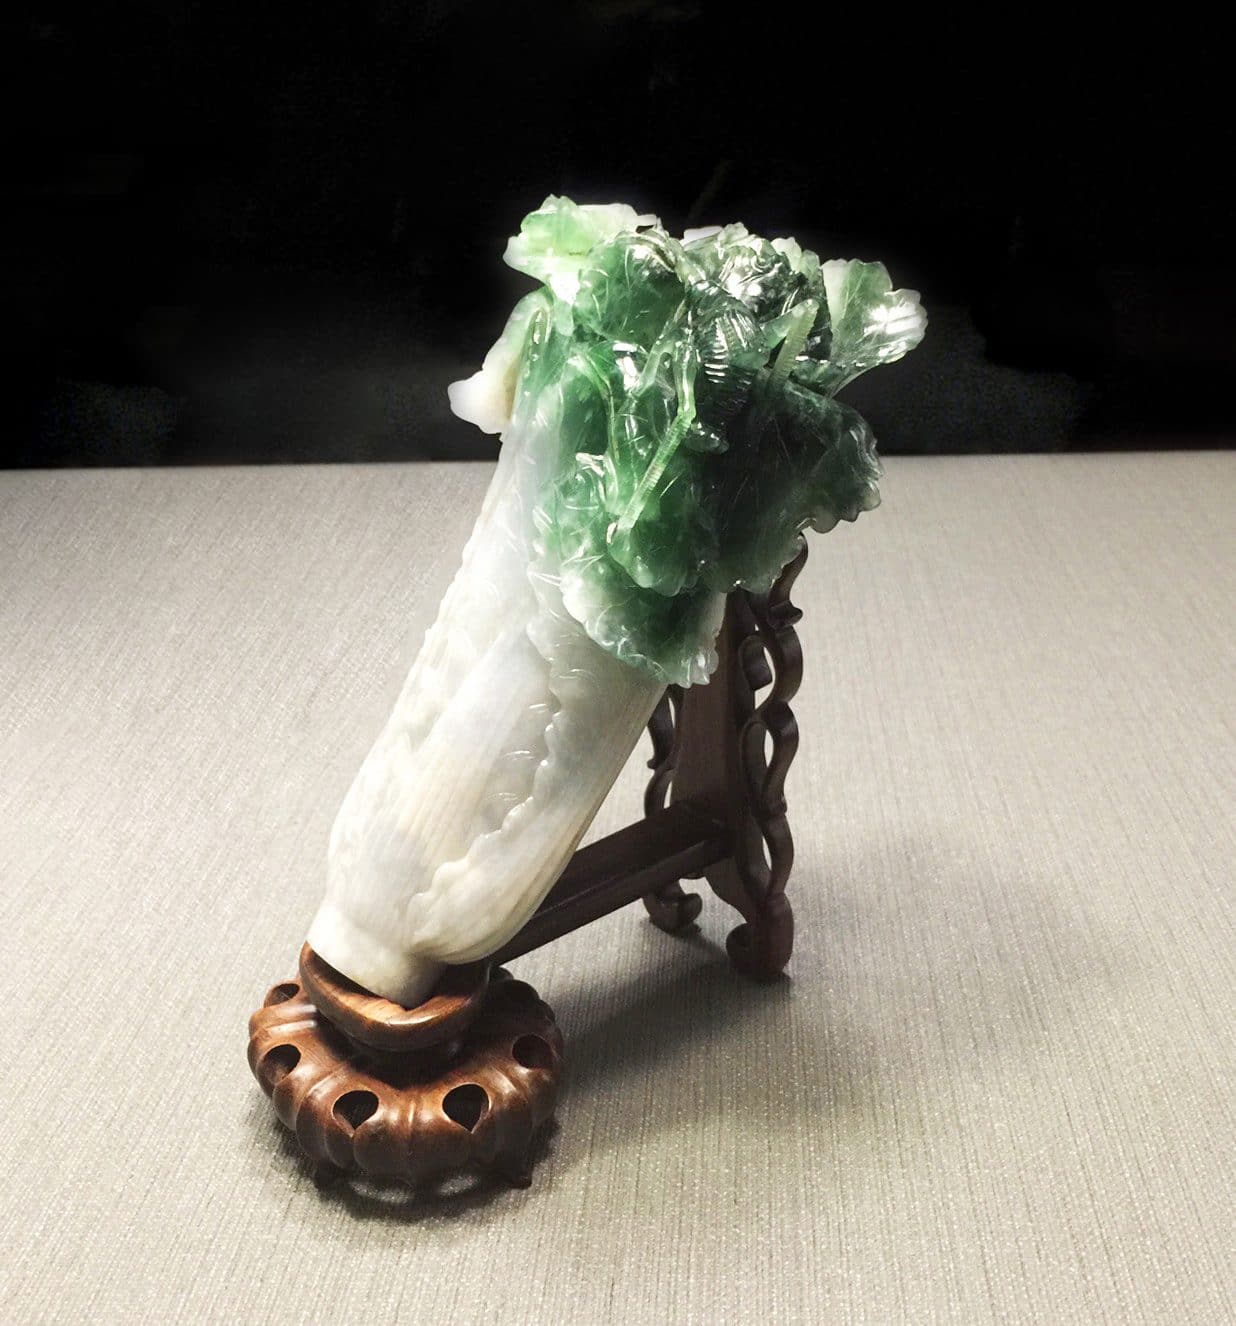 Piece of jade carved in the shape of a cabbage with a grasshopper on it